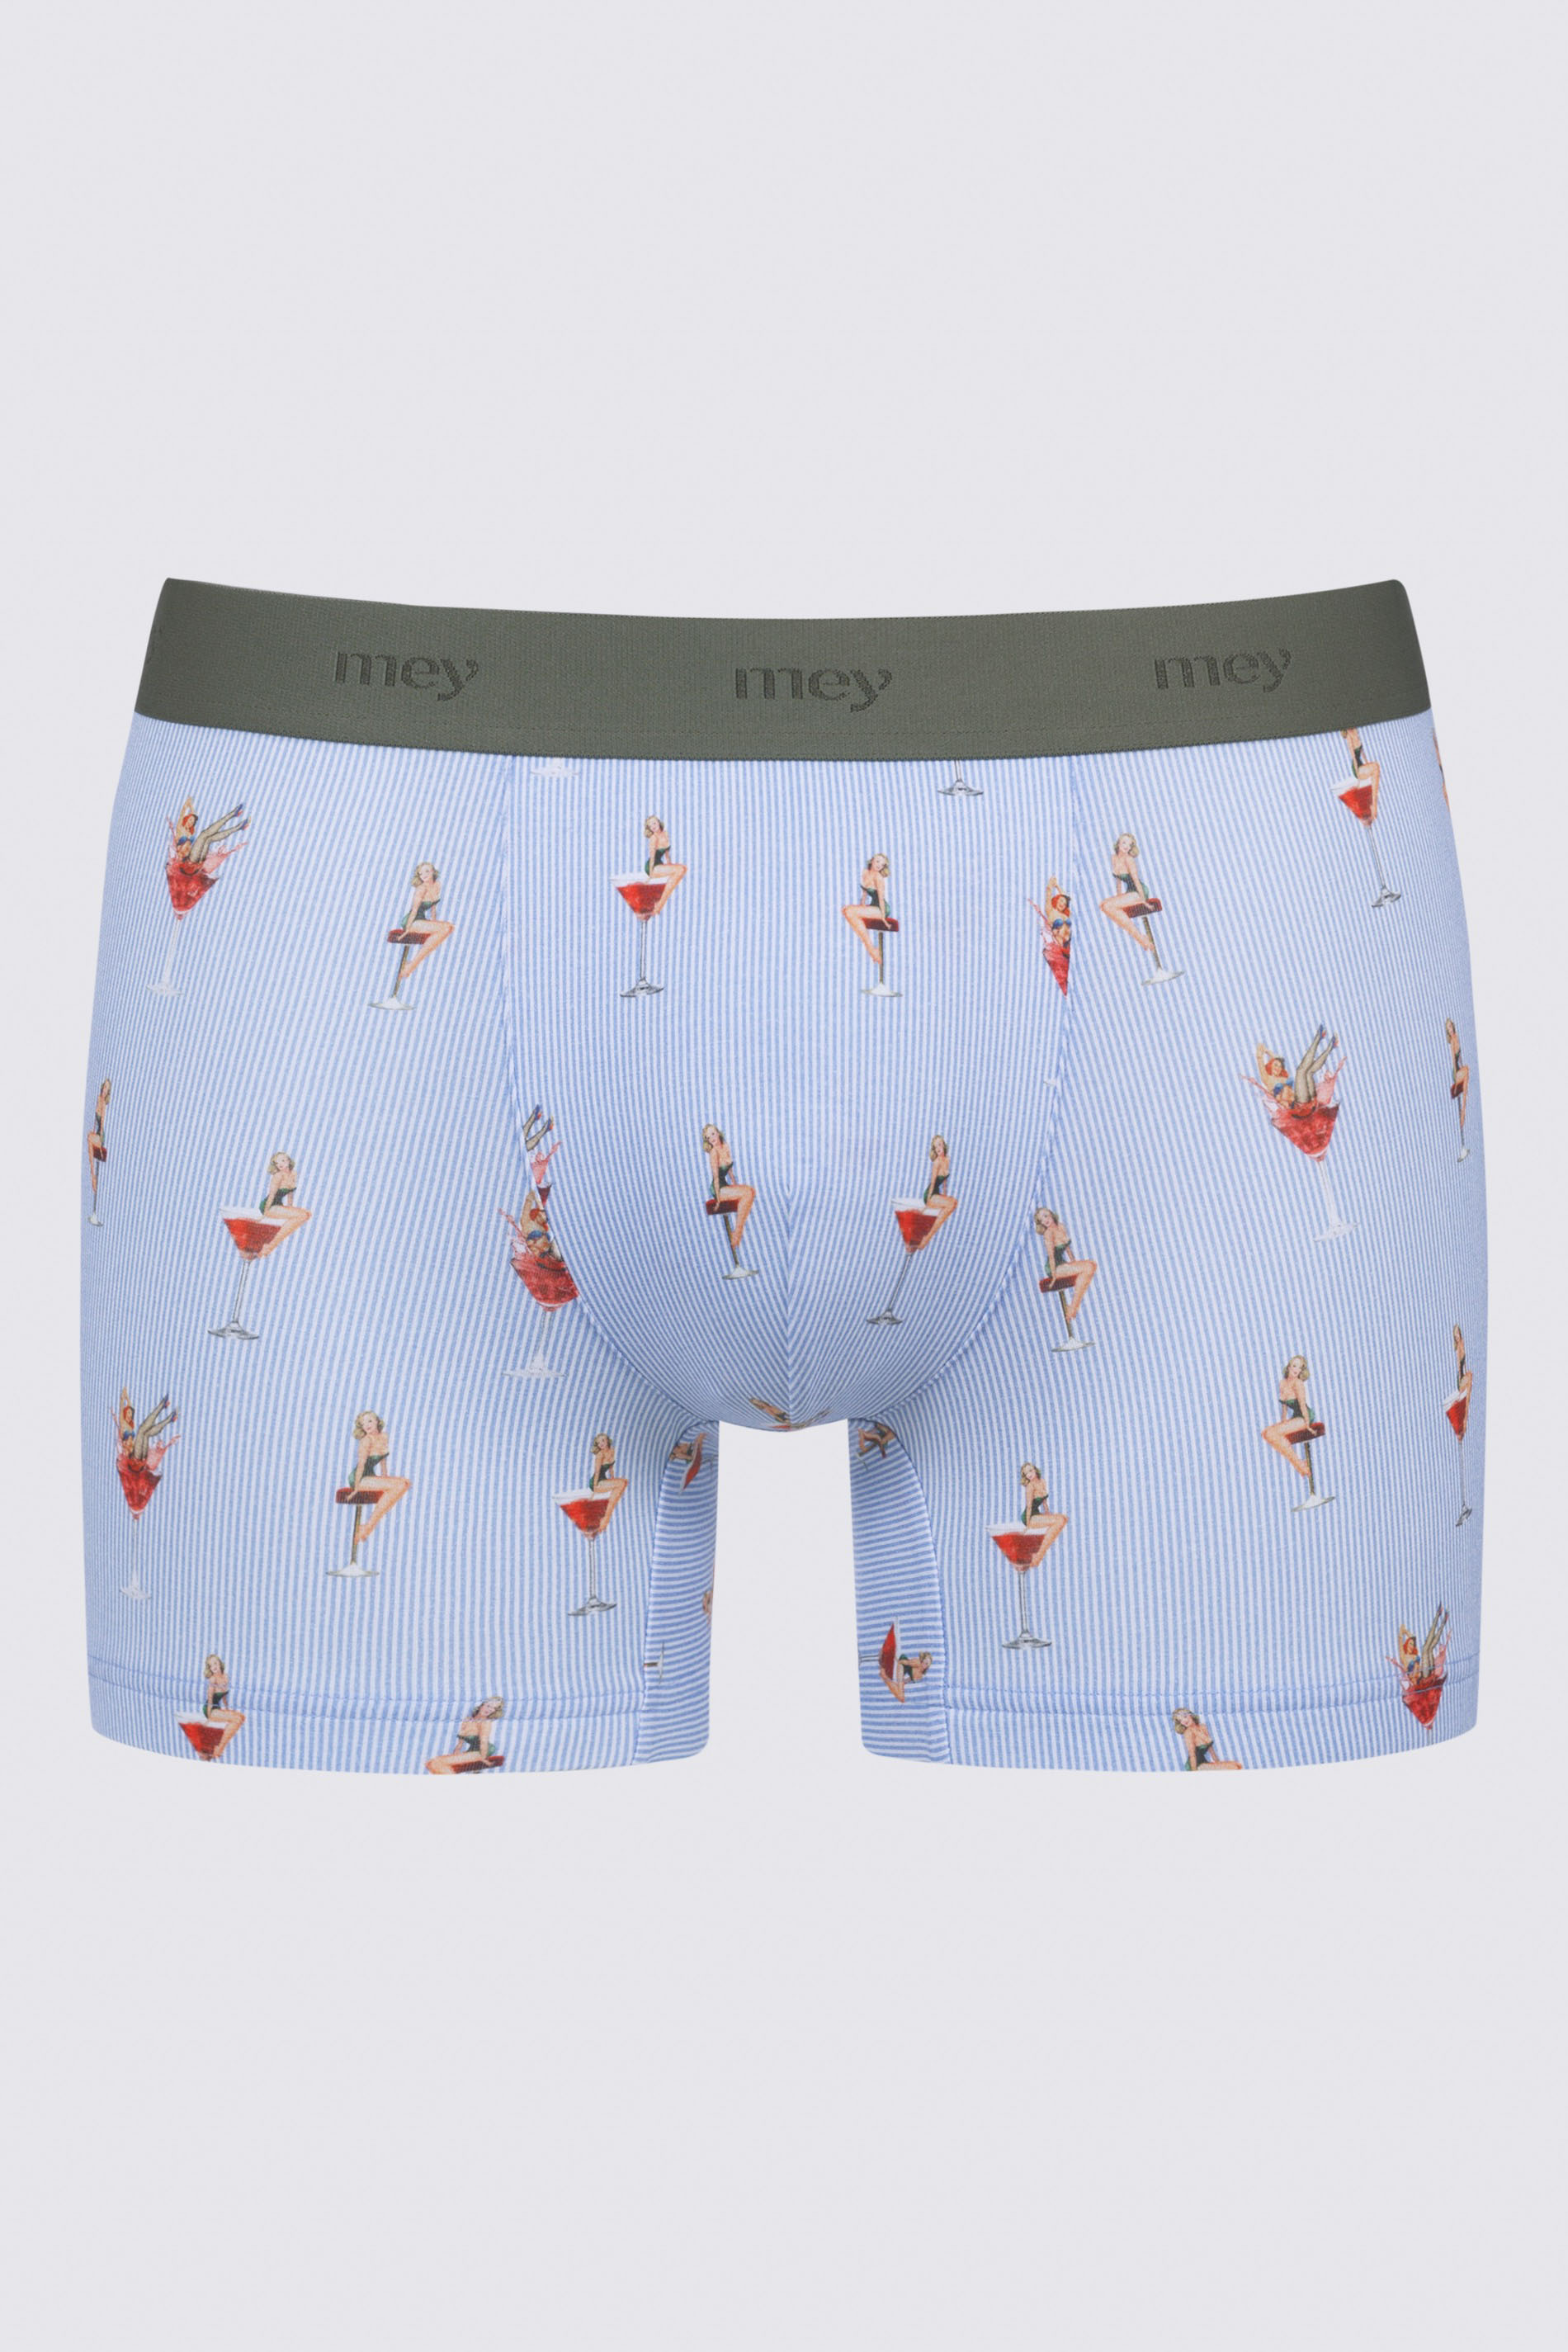 Shorty Serie RE:THINK PIN-UP GIRL Uitknippen | mey®